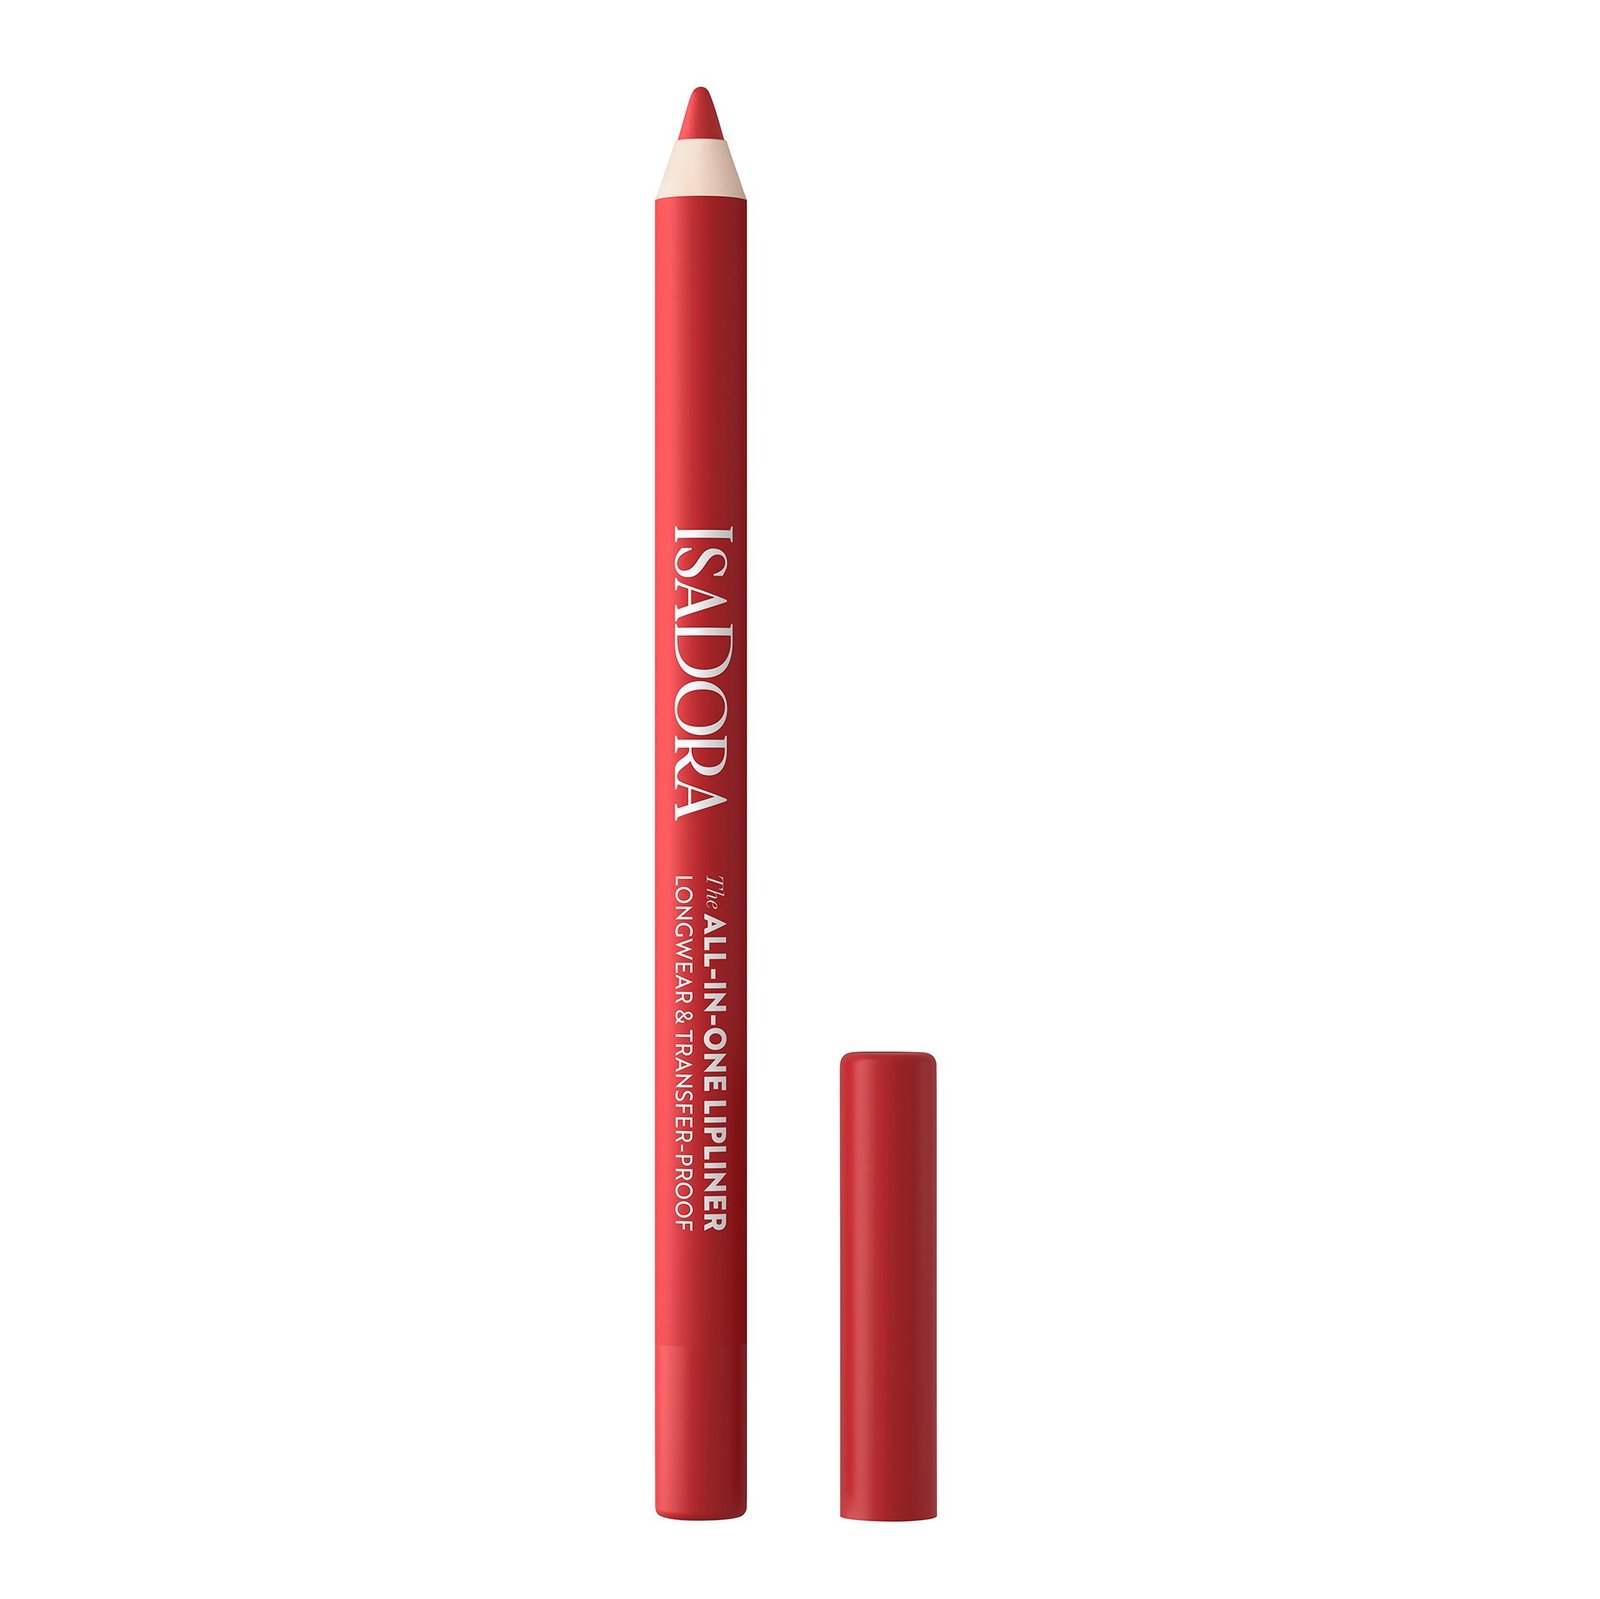 IsaDora All-in-One Lipliner 11 Cherry Red 1 st